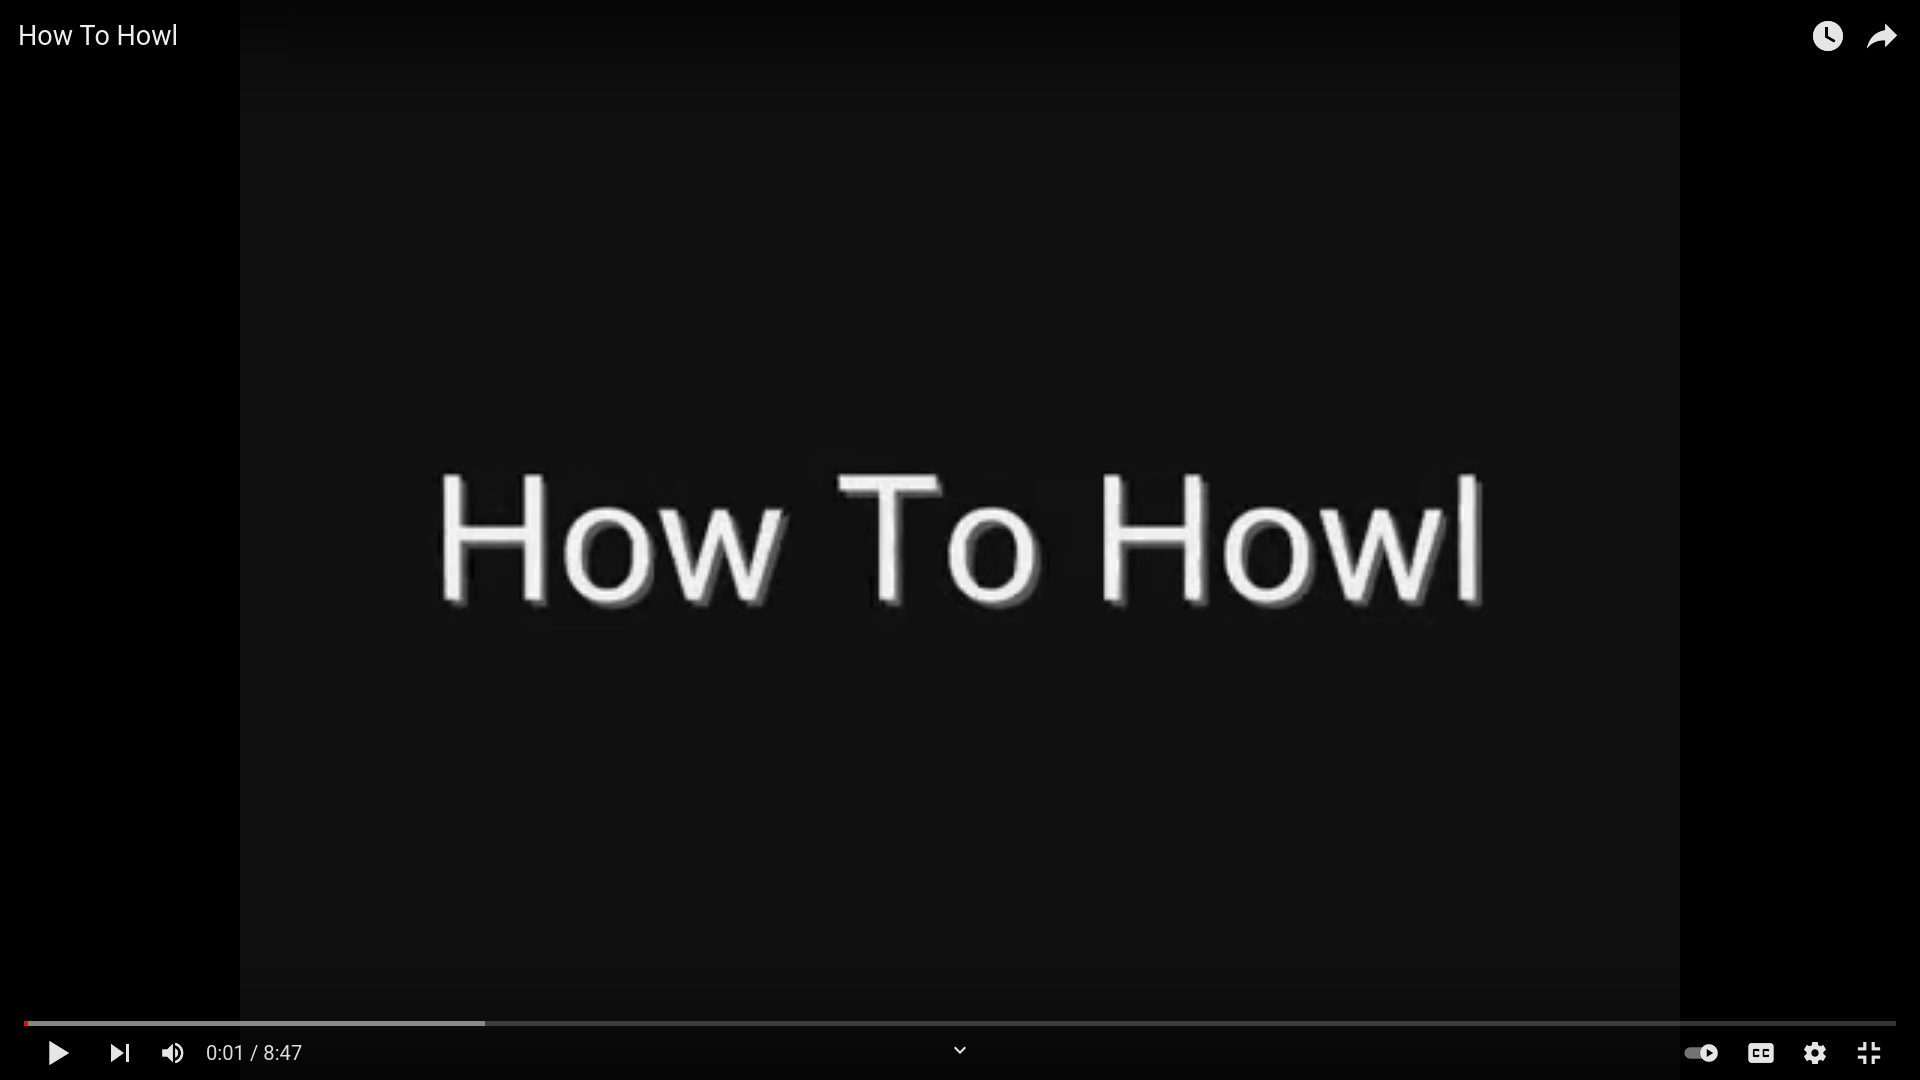 How To Howl